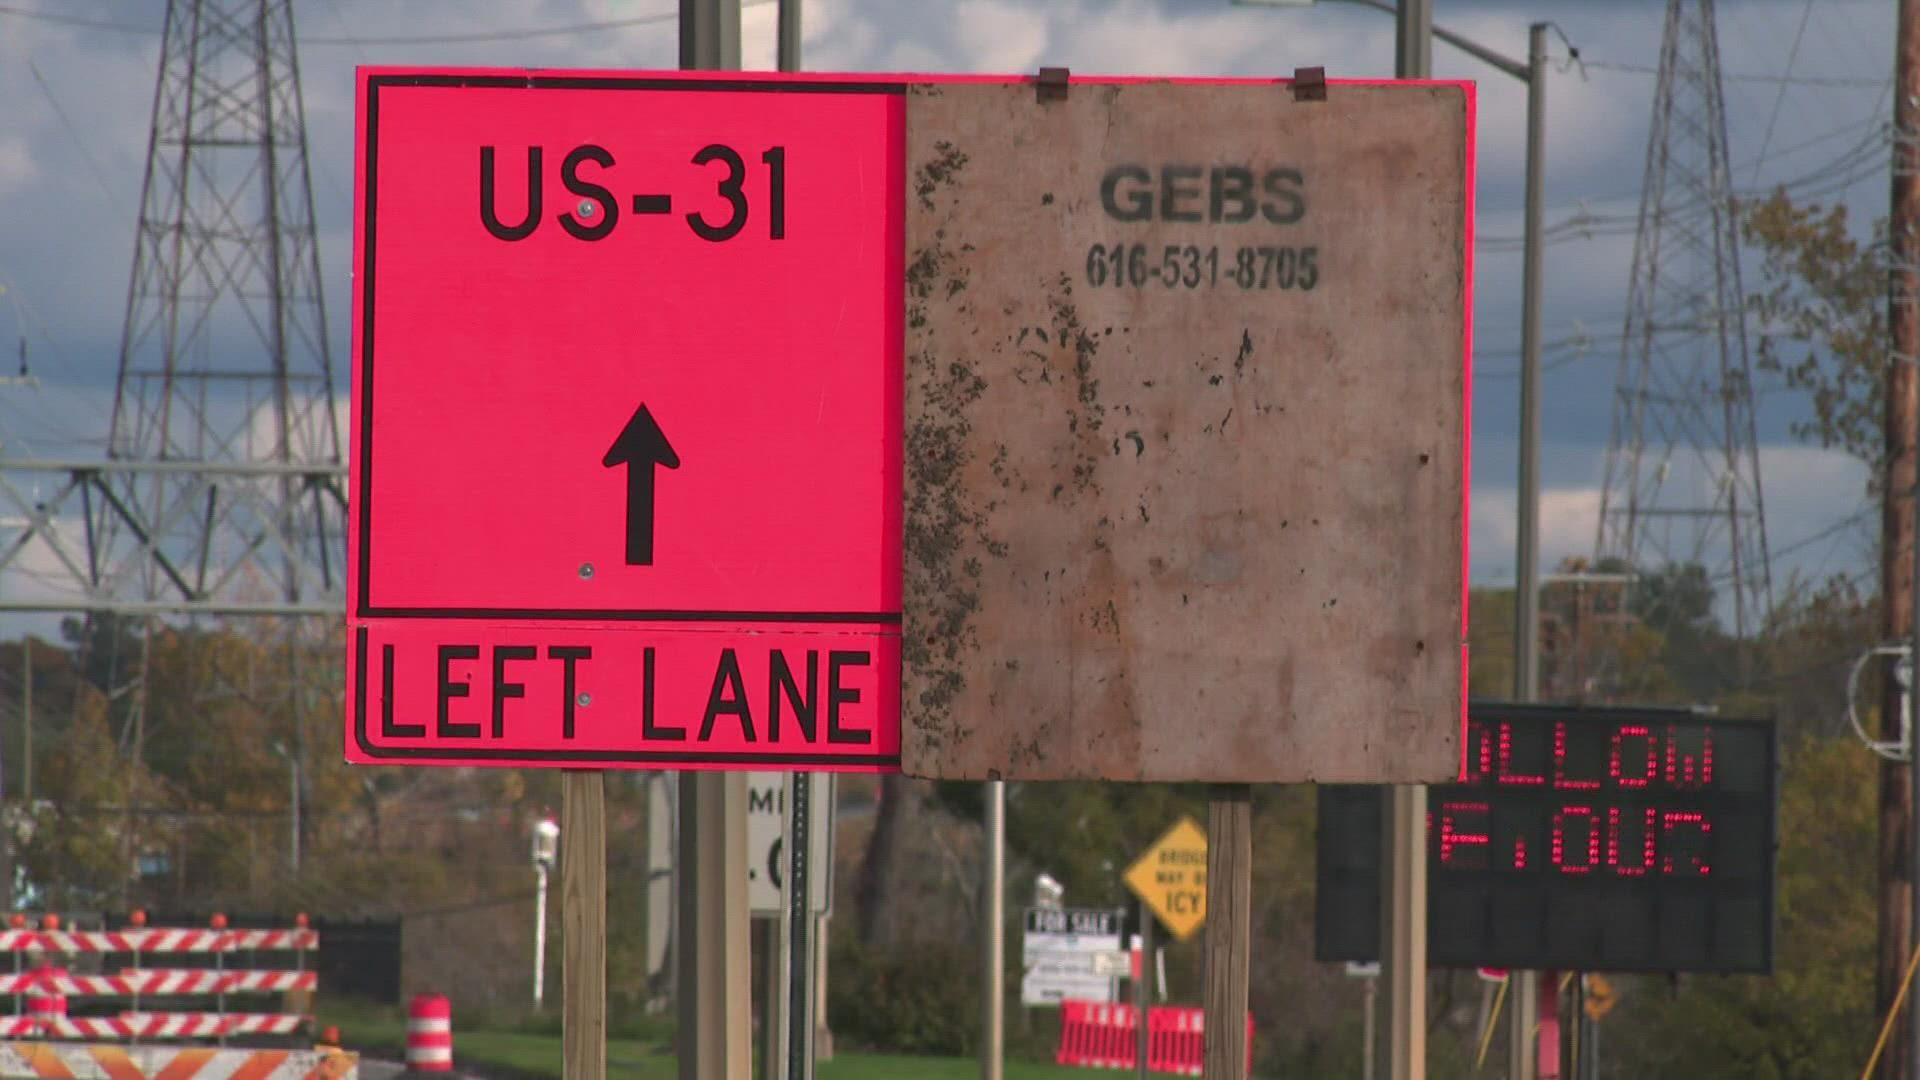 MDOT told 13 ON YOUR SIDE that construction will resume sometime this Spring.